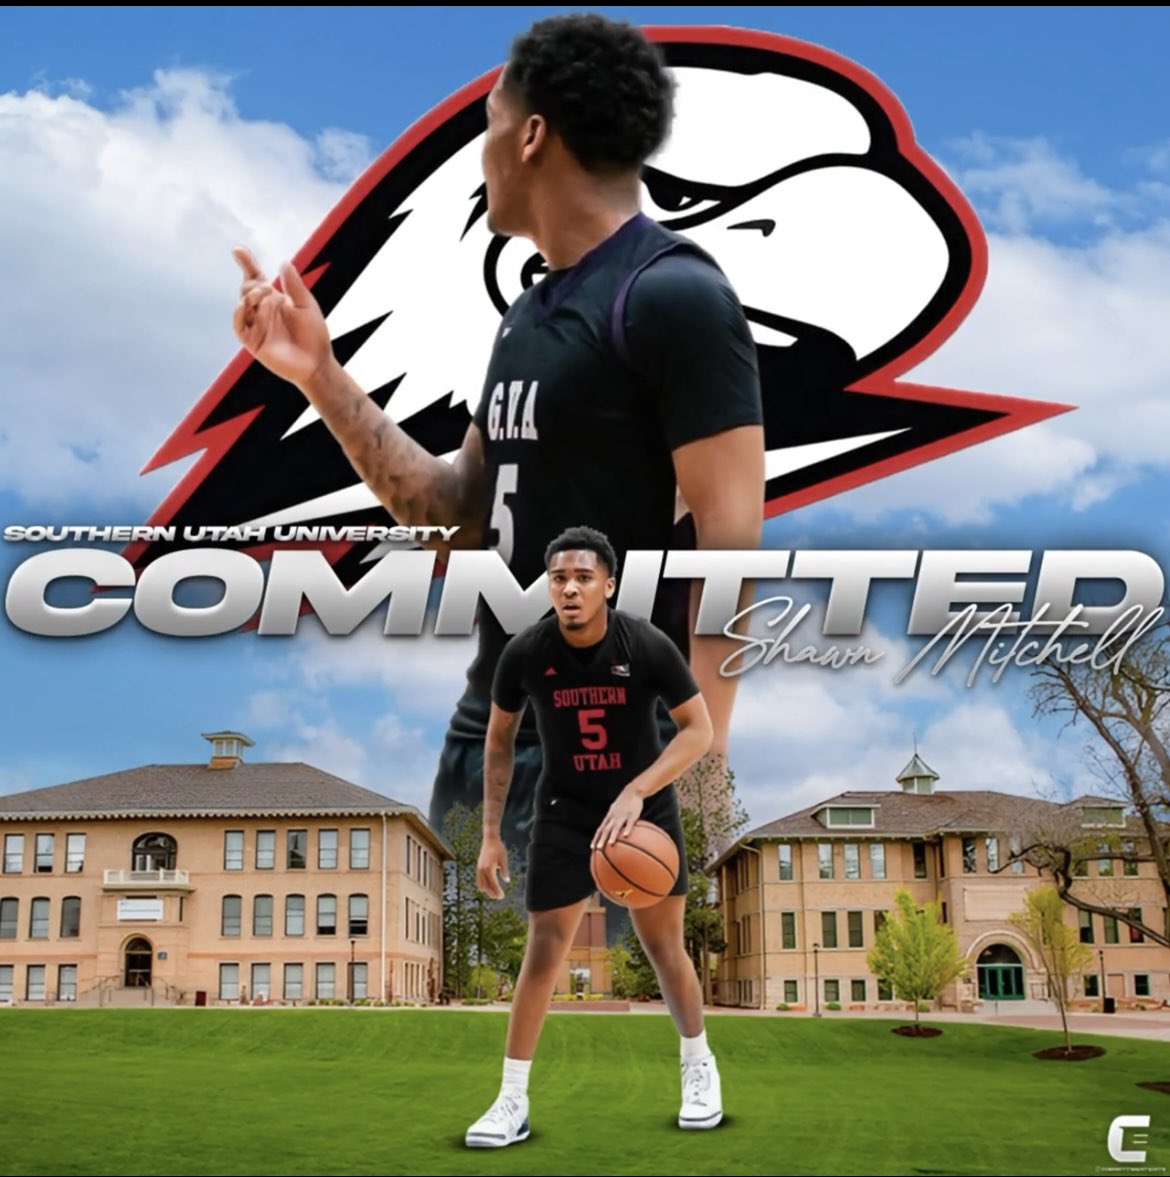 I want to thank the man above without him none of this would be possible, second I want to thank my family , coaches, and friend for pushing me and allowing me to never give up , with that being said I will continue my division 1 athletic career and education at southern Utah ❤️